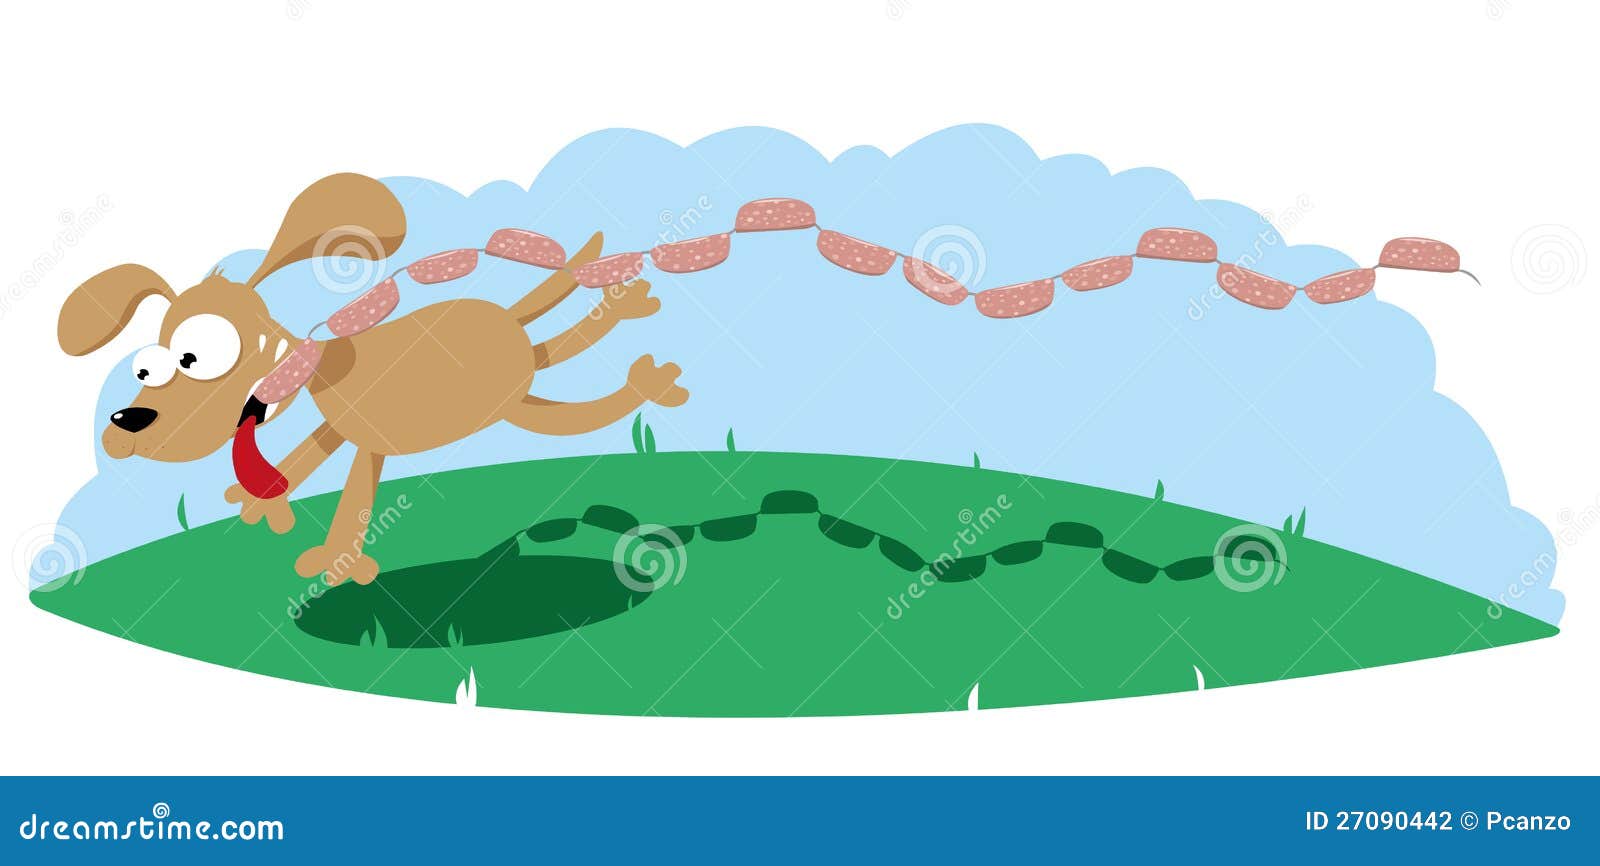 Running Sausages Stock Illustrations – 19 Running Sausages Stock